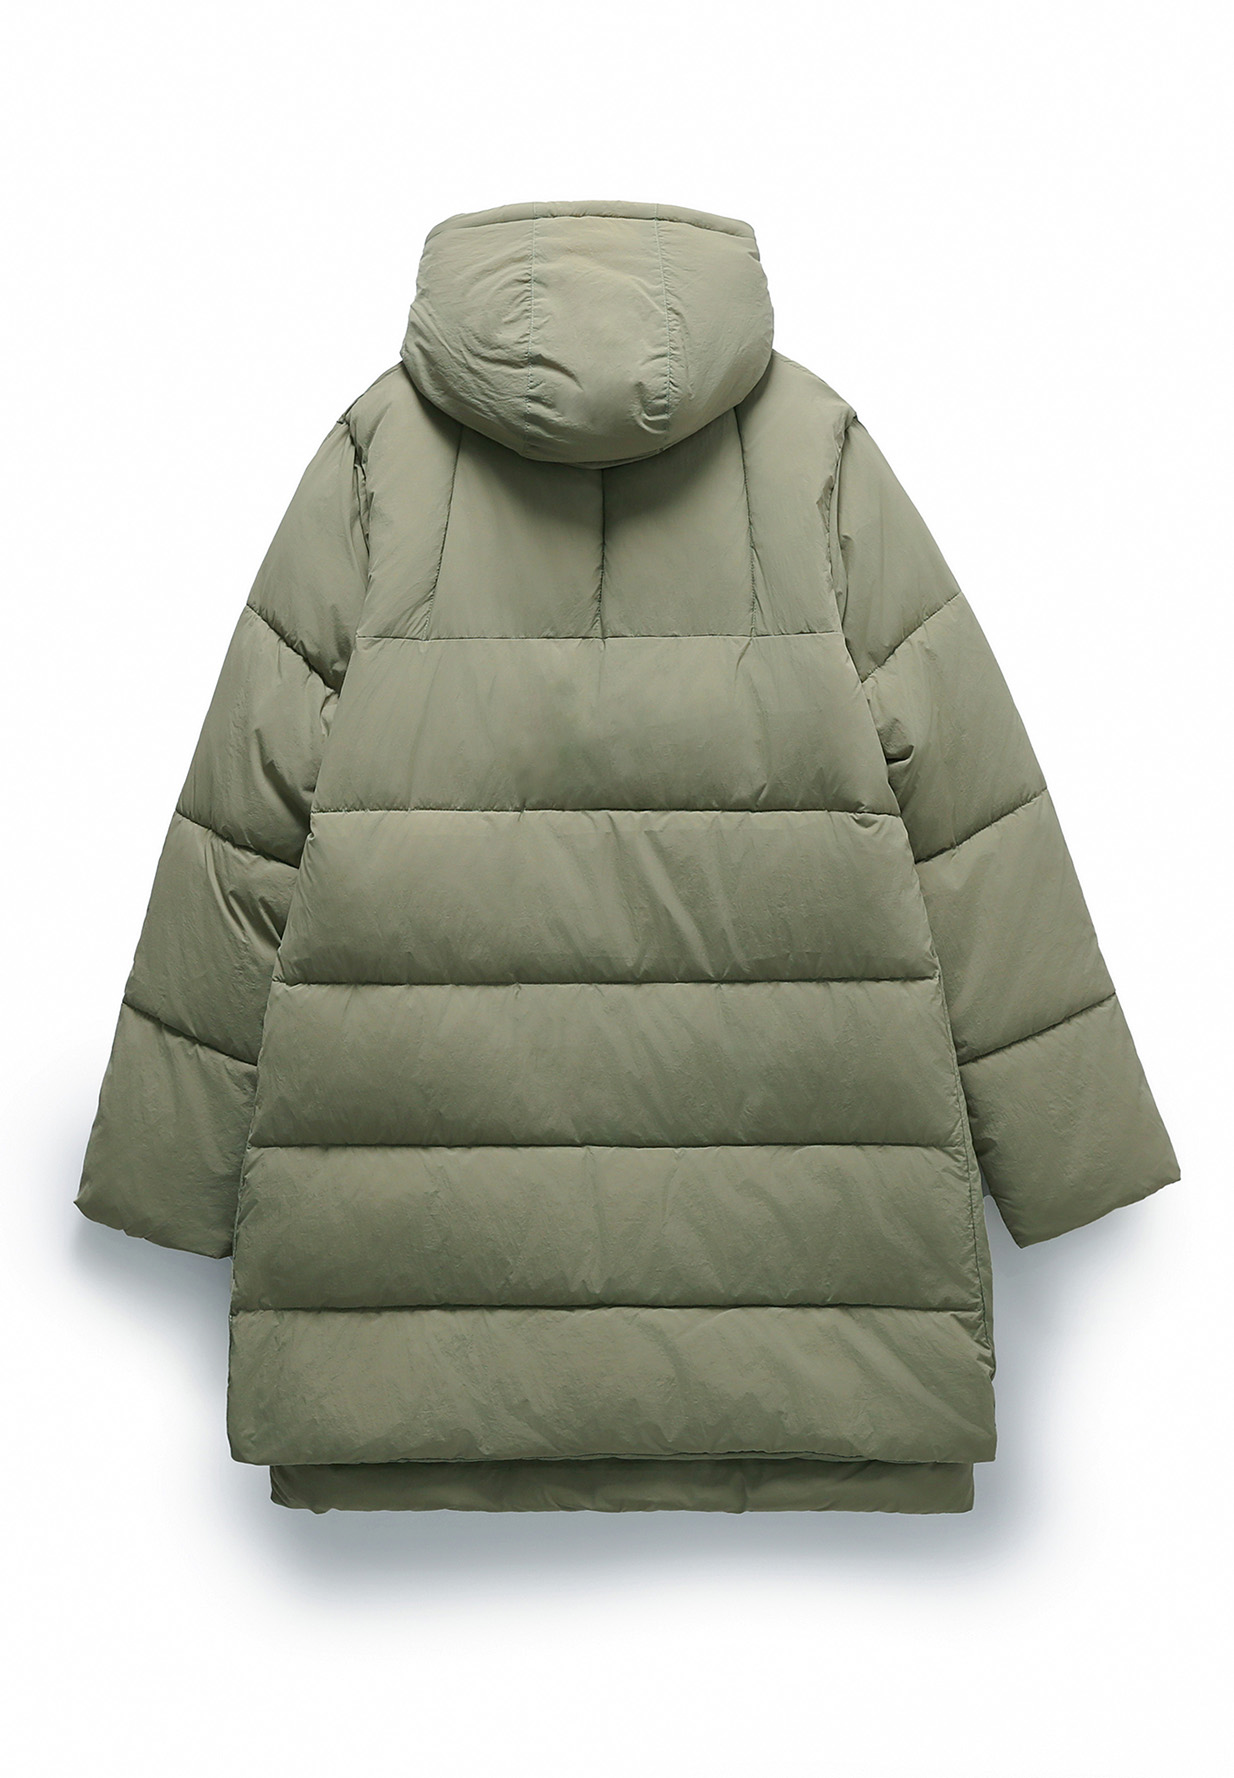 EMBASSY OF BRICKS AND LOGS Fargo Puffer Jacket pale olive S